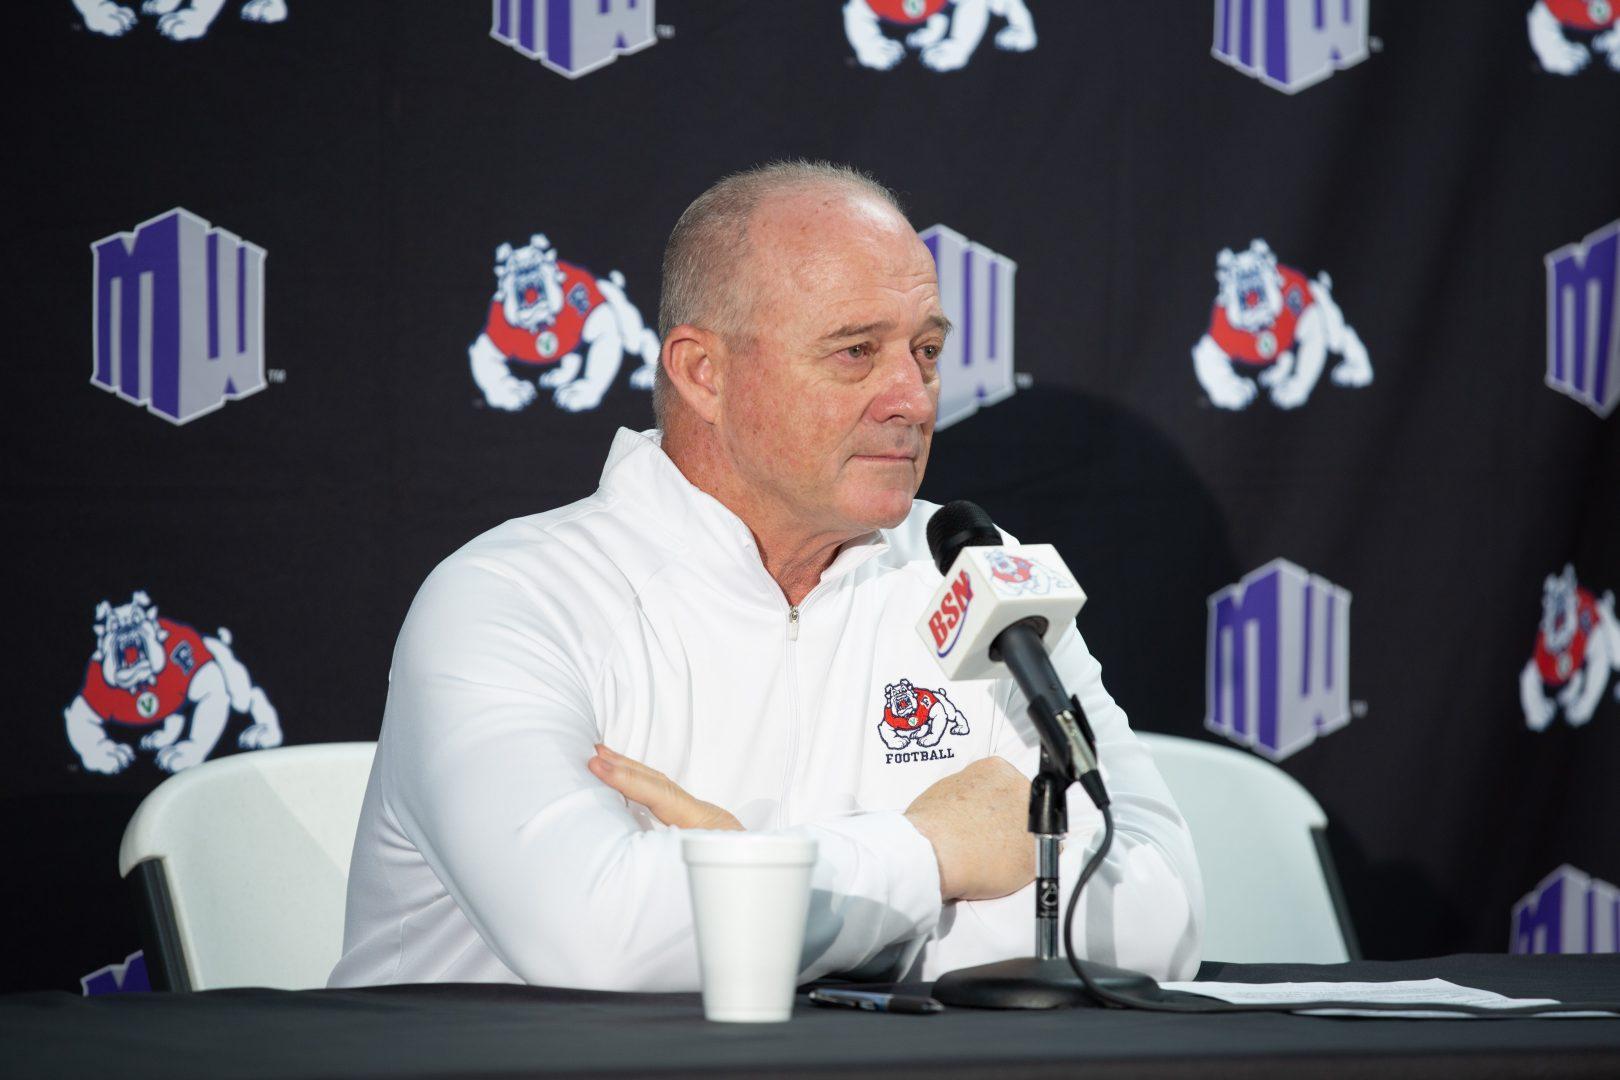 An emotional Jeff Tedford during his press conference announces that he is stepping down as head coach of the Fresno State Bulldogs football team on Dec. 6, 2019. (Armando Carreno/The Collegian) 